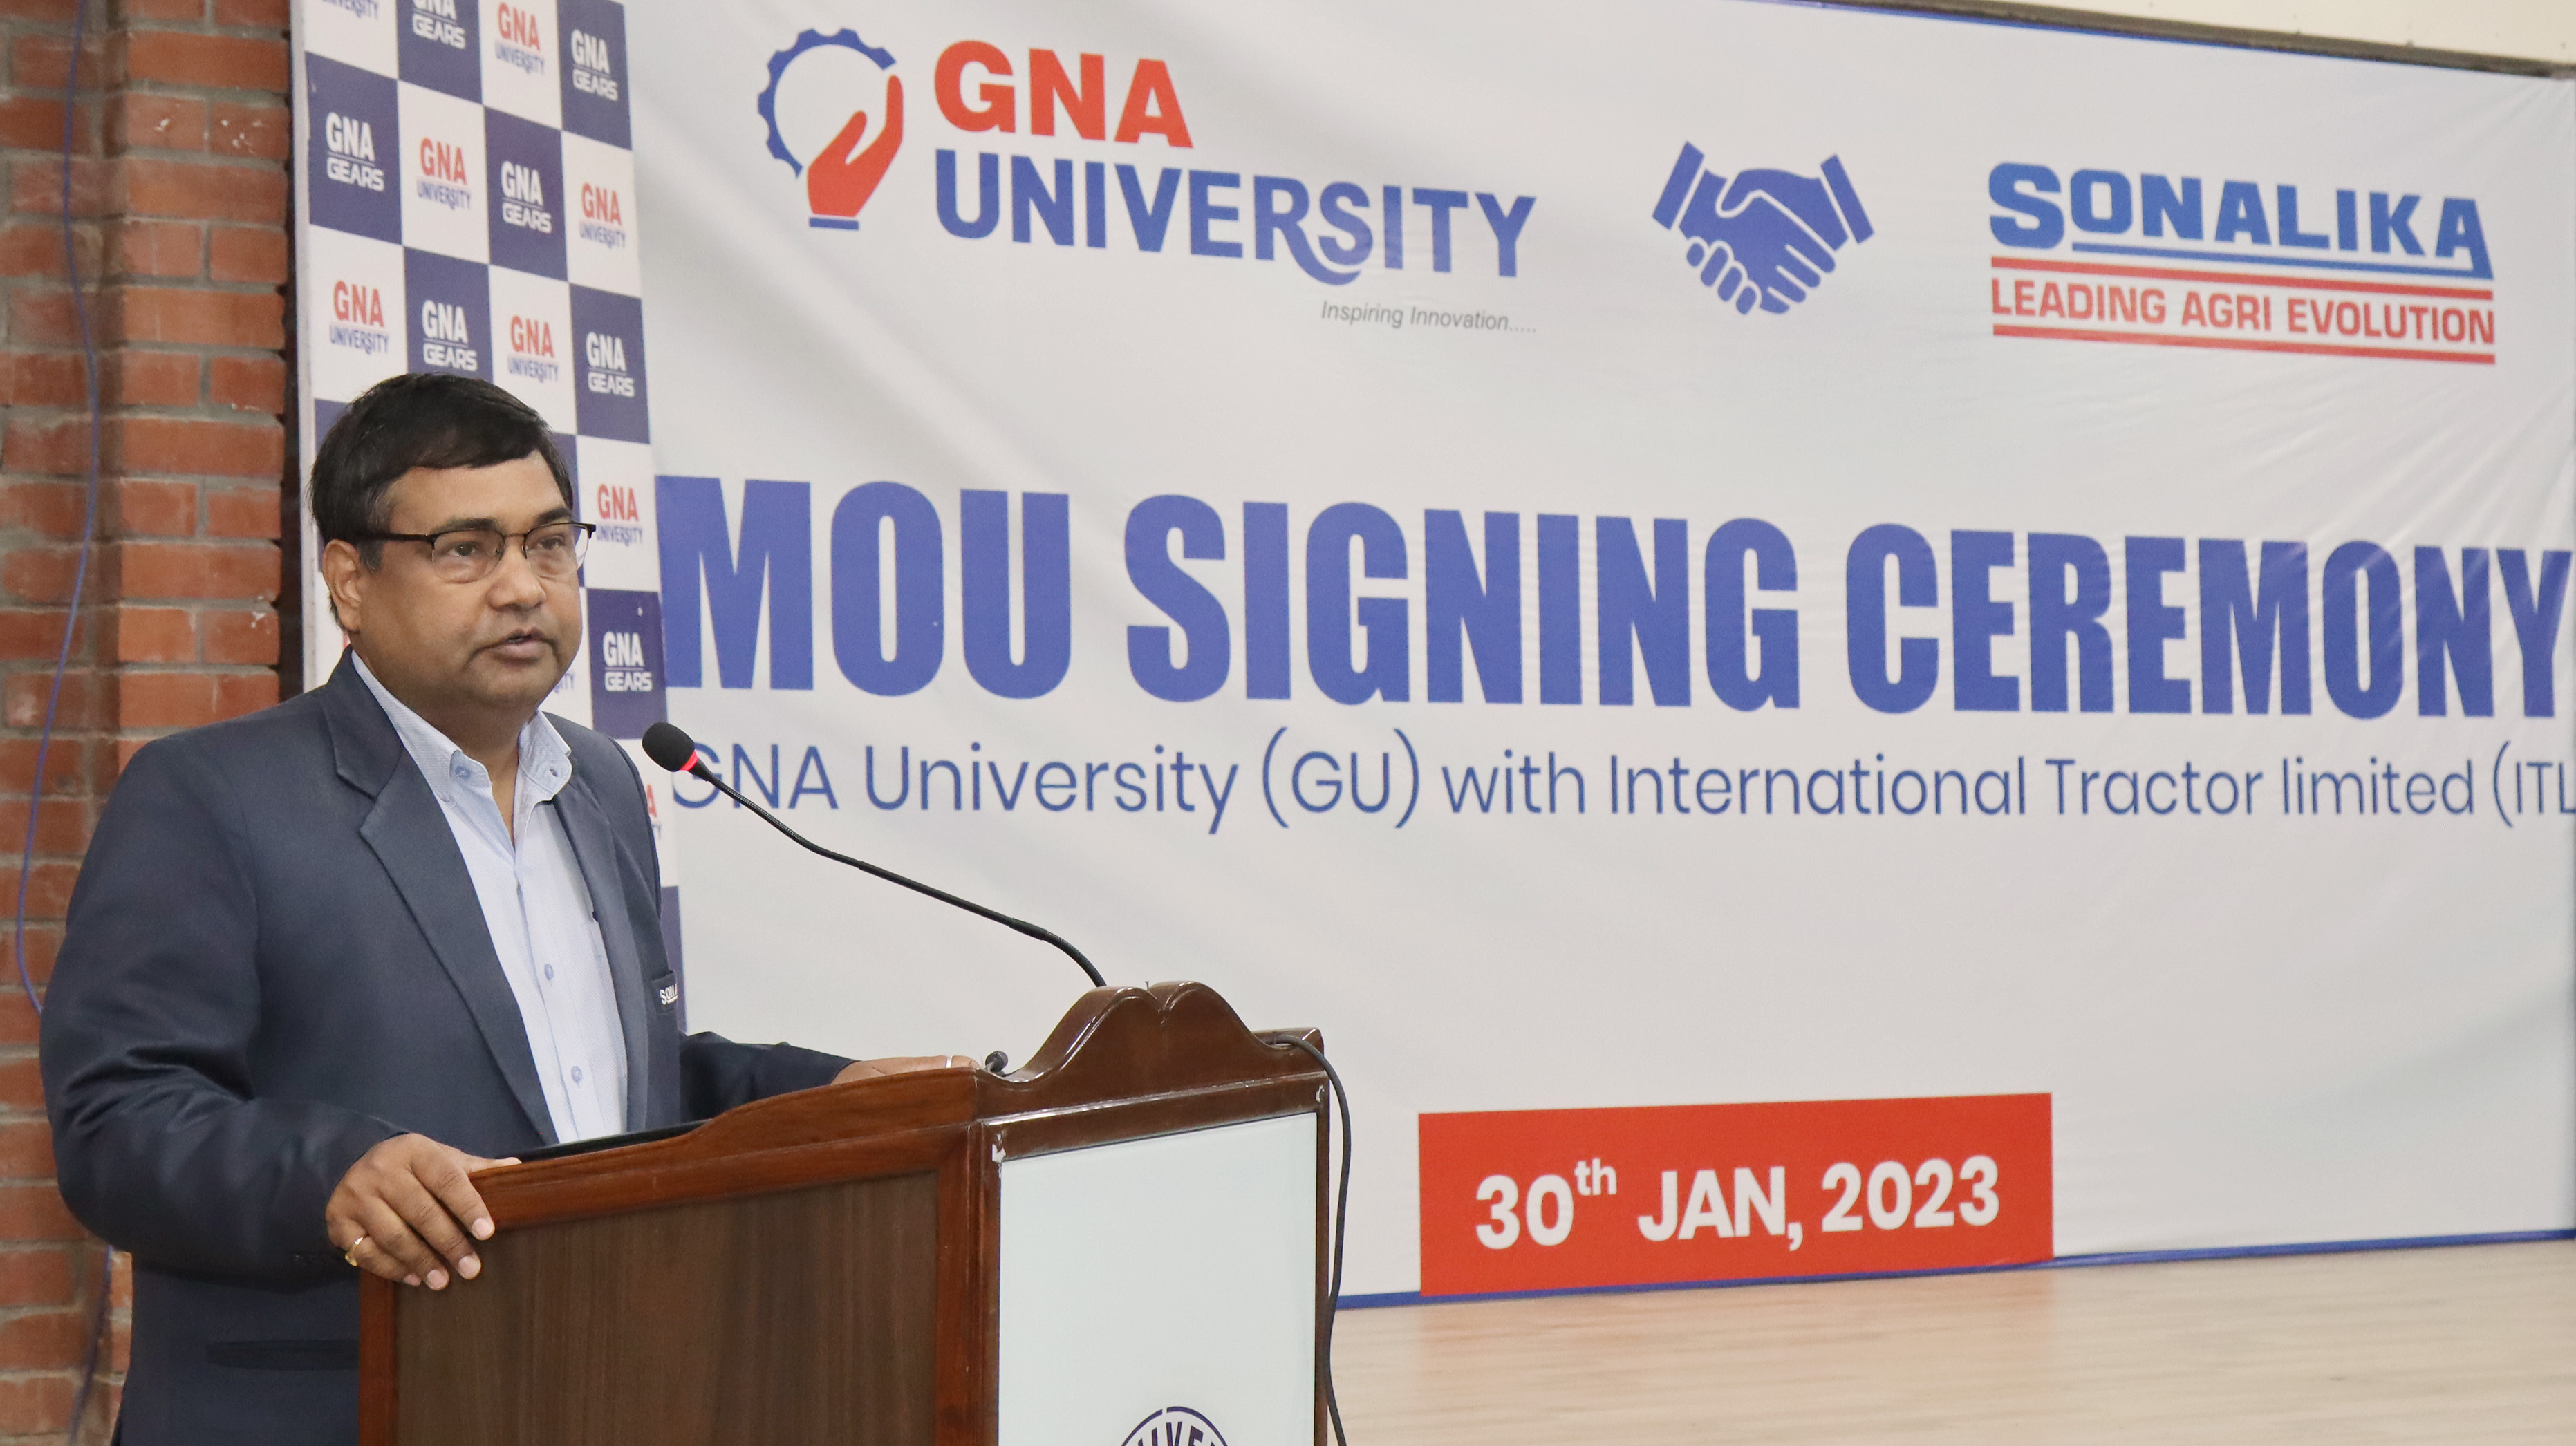 MOU between GNA University and International Tractors Limited (ITL), Sonalika